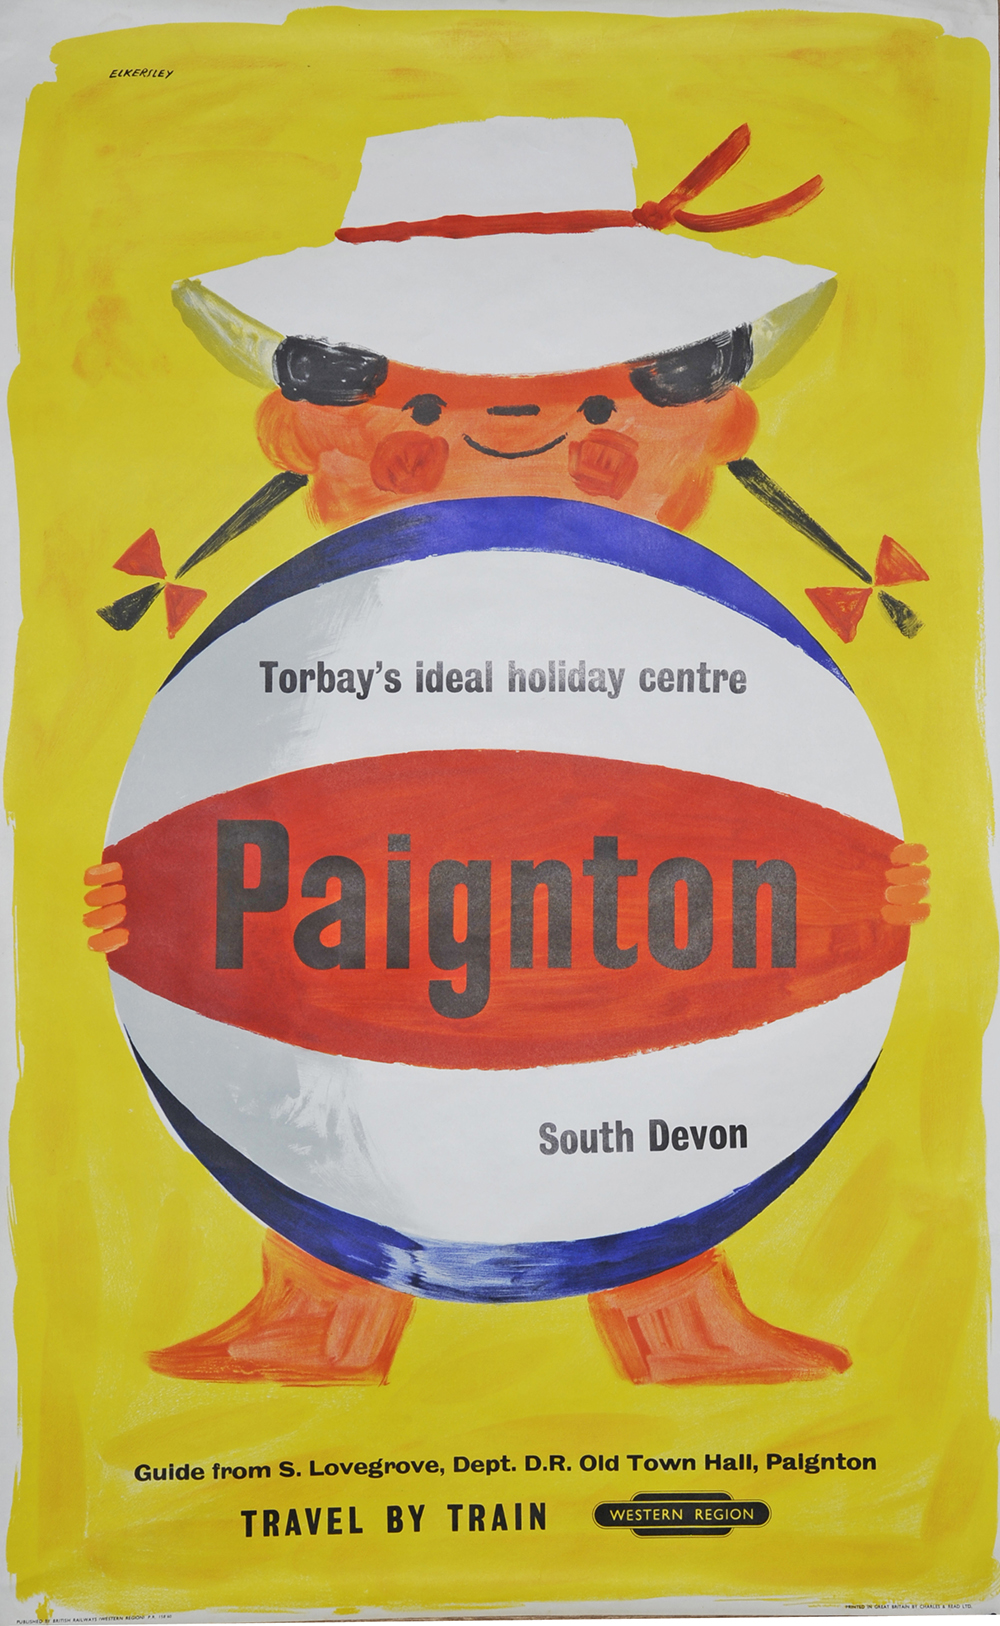 Poster BR 'Paignton' by Eckersley, D/R size. Depicts the classic image of young girl on beach with a huge beach ball held in front. Published by BR Western Region, printed by Charles & Read